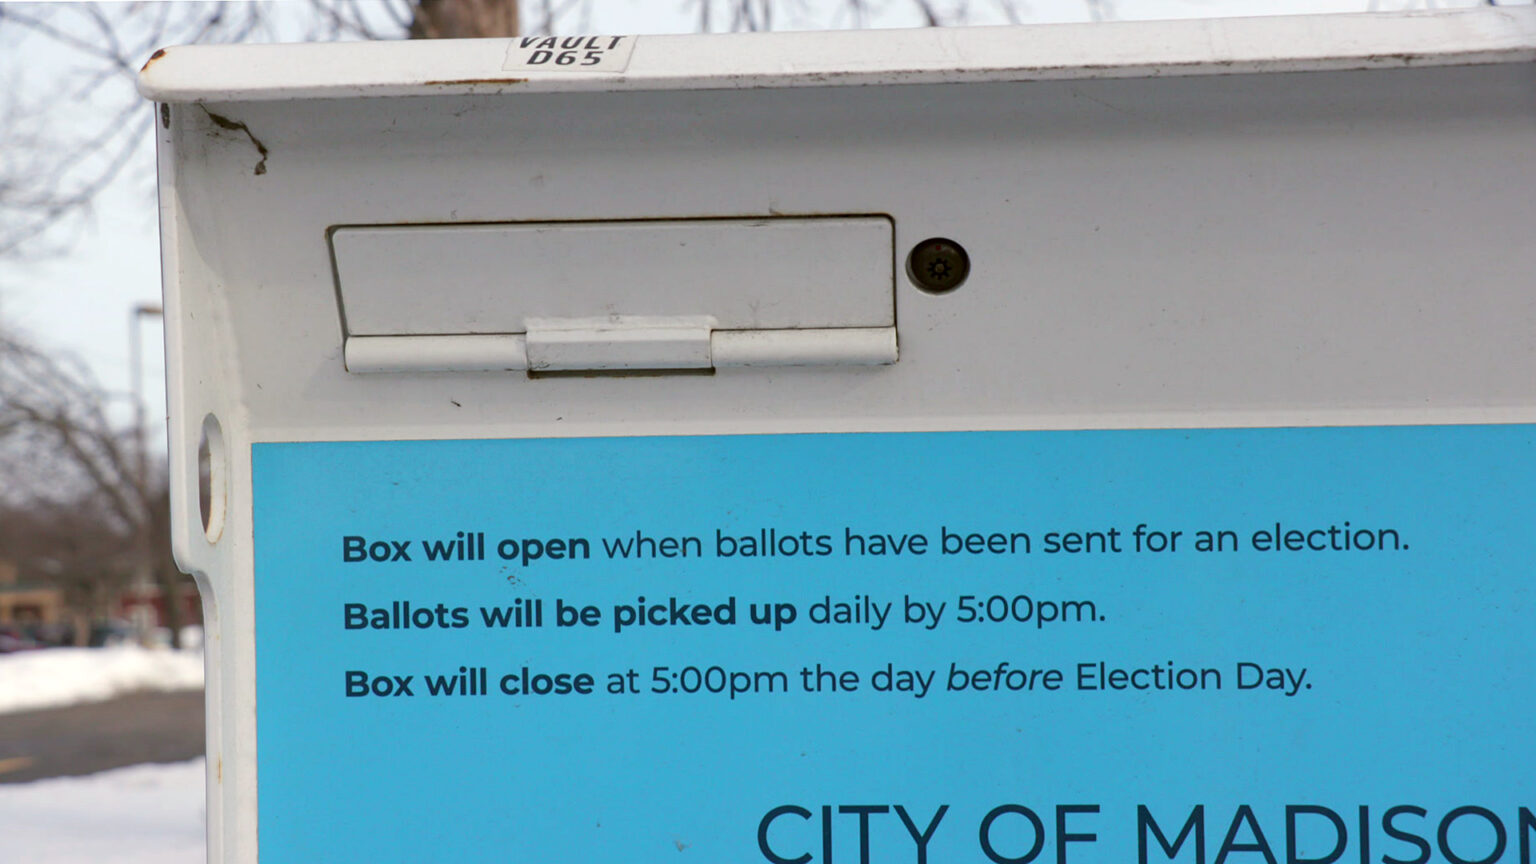 Words reading Box will open when ballots have been sent for an election., Ballots will be picked up daily by 5:00pm., and Box will close at 5:00pm the day before Election Day. are visible on a label affixed to the front face of a metal box with a swinging covered door slot and security camera lens, with an out-of-focus snow-covered lawn, road and leafless trees in the background.